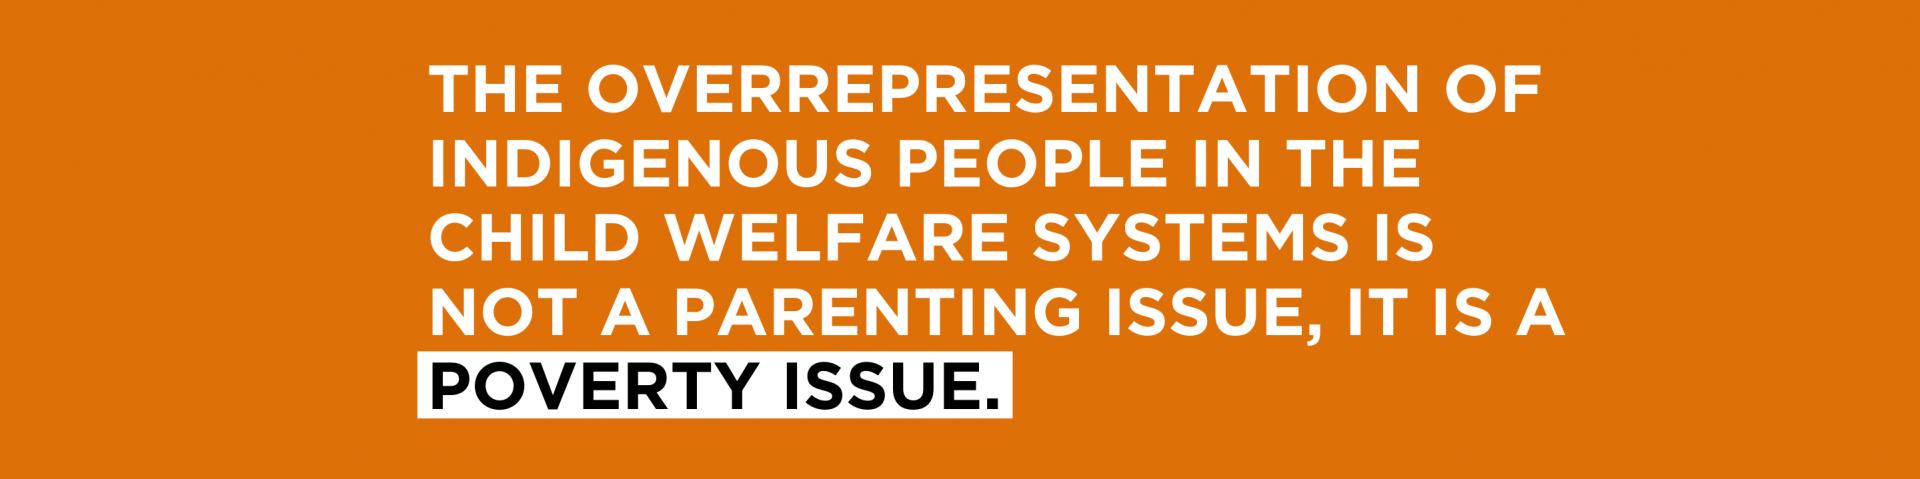 Text: The overrepresentation of Indigenous people in child welfare systems is not a parenting issue, it is a poverty issue. 